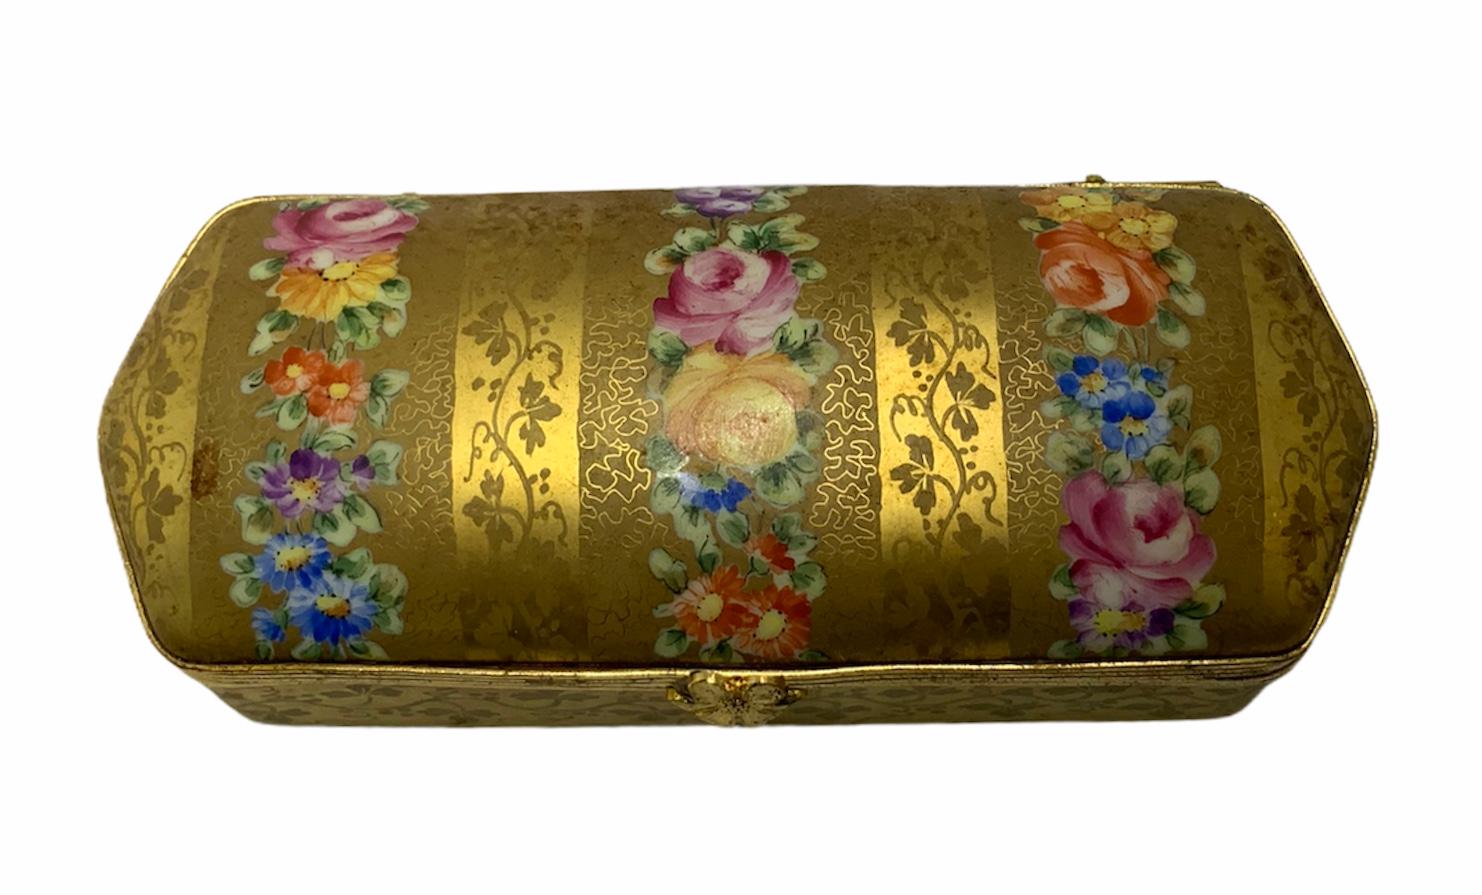 This is a gilded hand painted elongated hinged box. It is decorated with a garland of flowers & festoon of branches of parsley leaves. Inside the lid, there is a single rose hand painted. This is an excellent box to keep jewelry, pen or pencils.